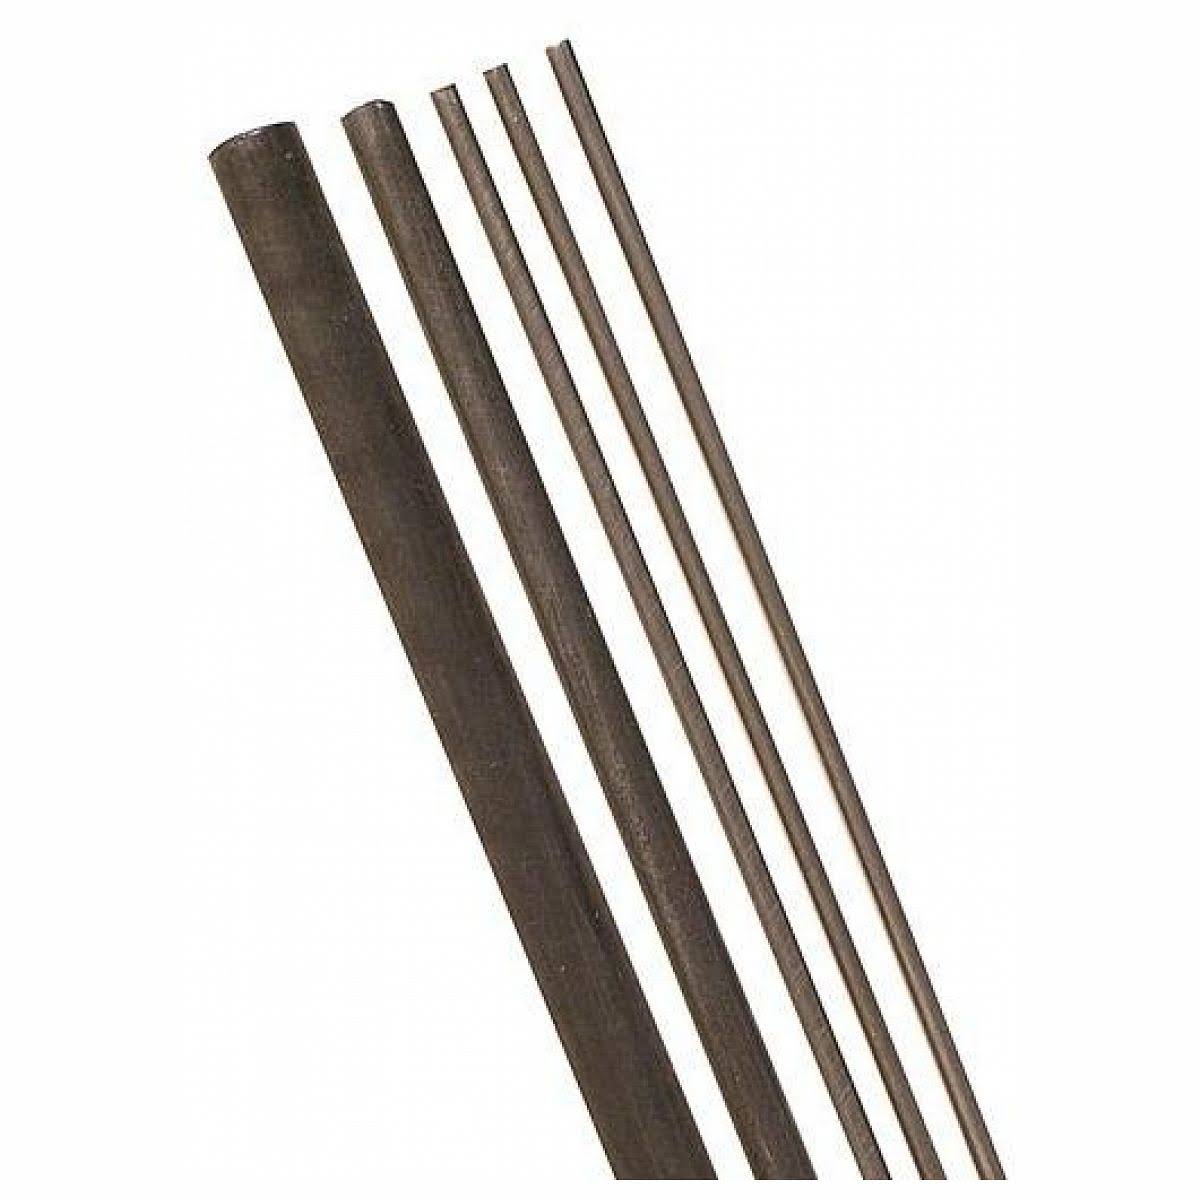 K&S Music Wire, 3/16" x 36" - 4 pack